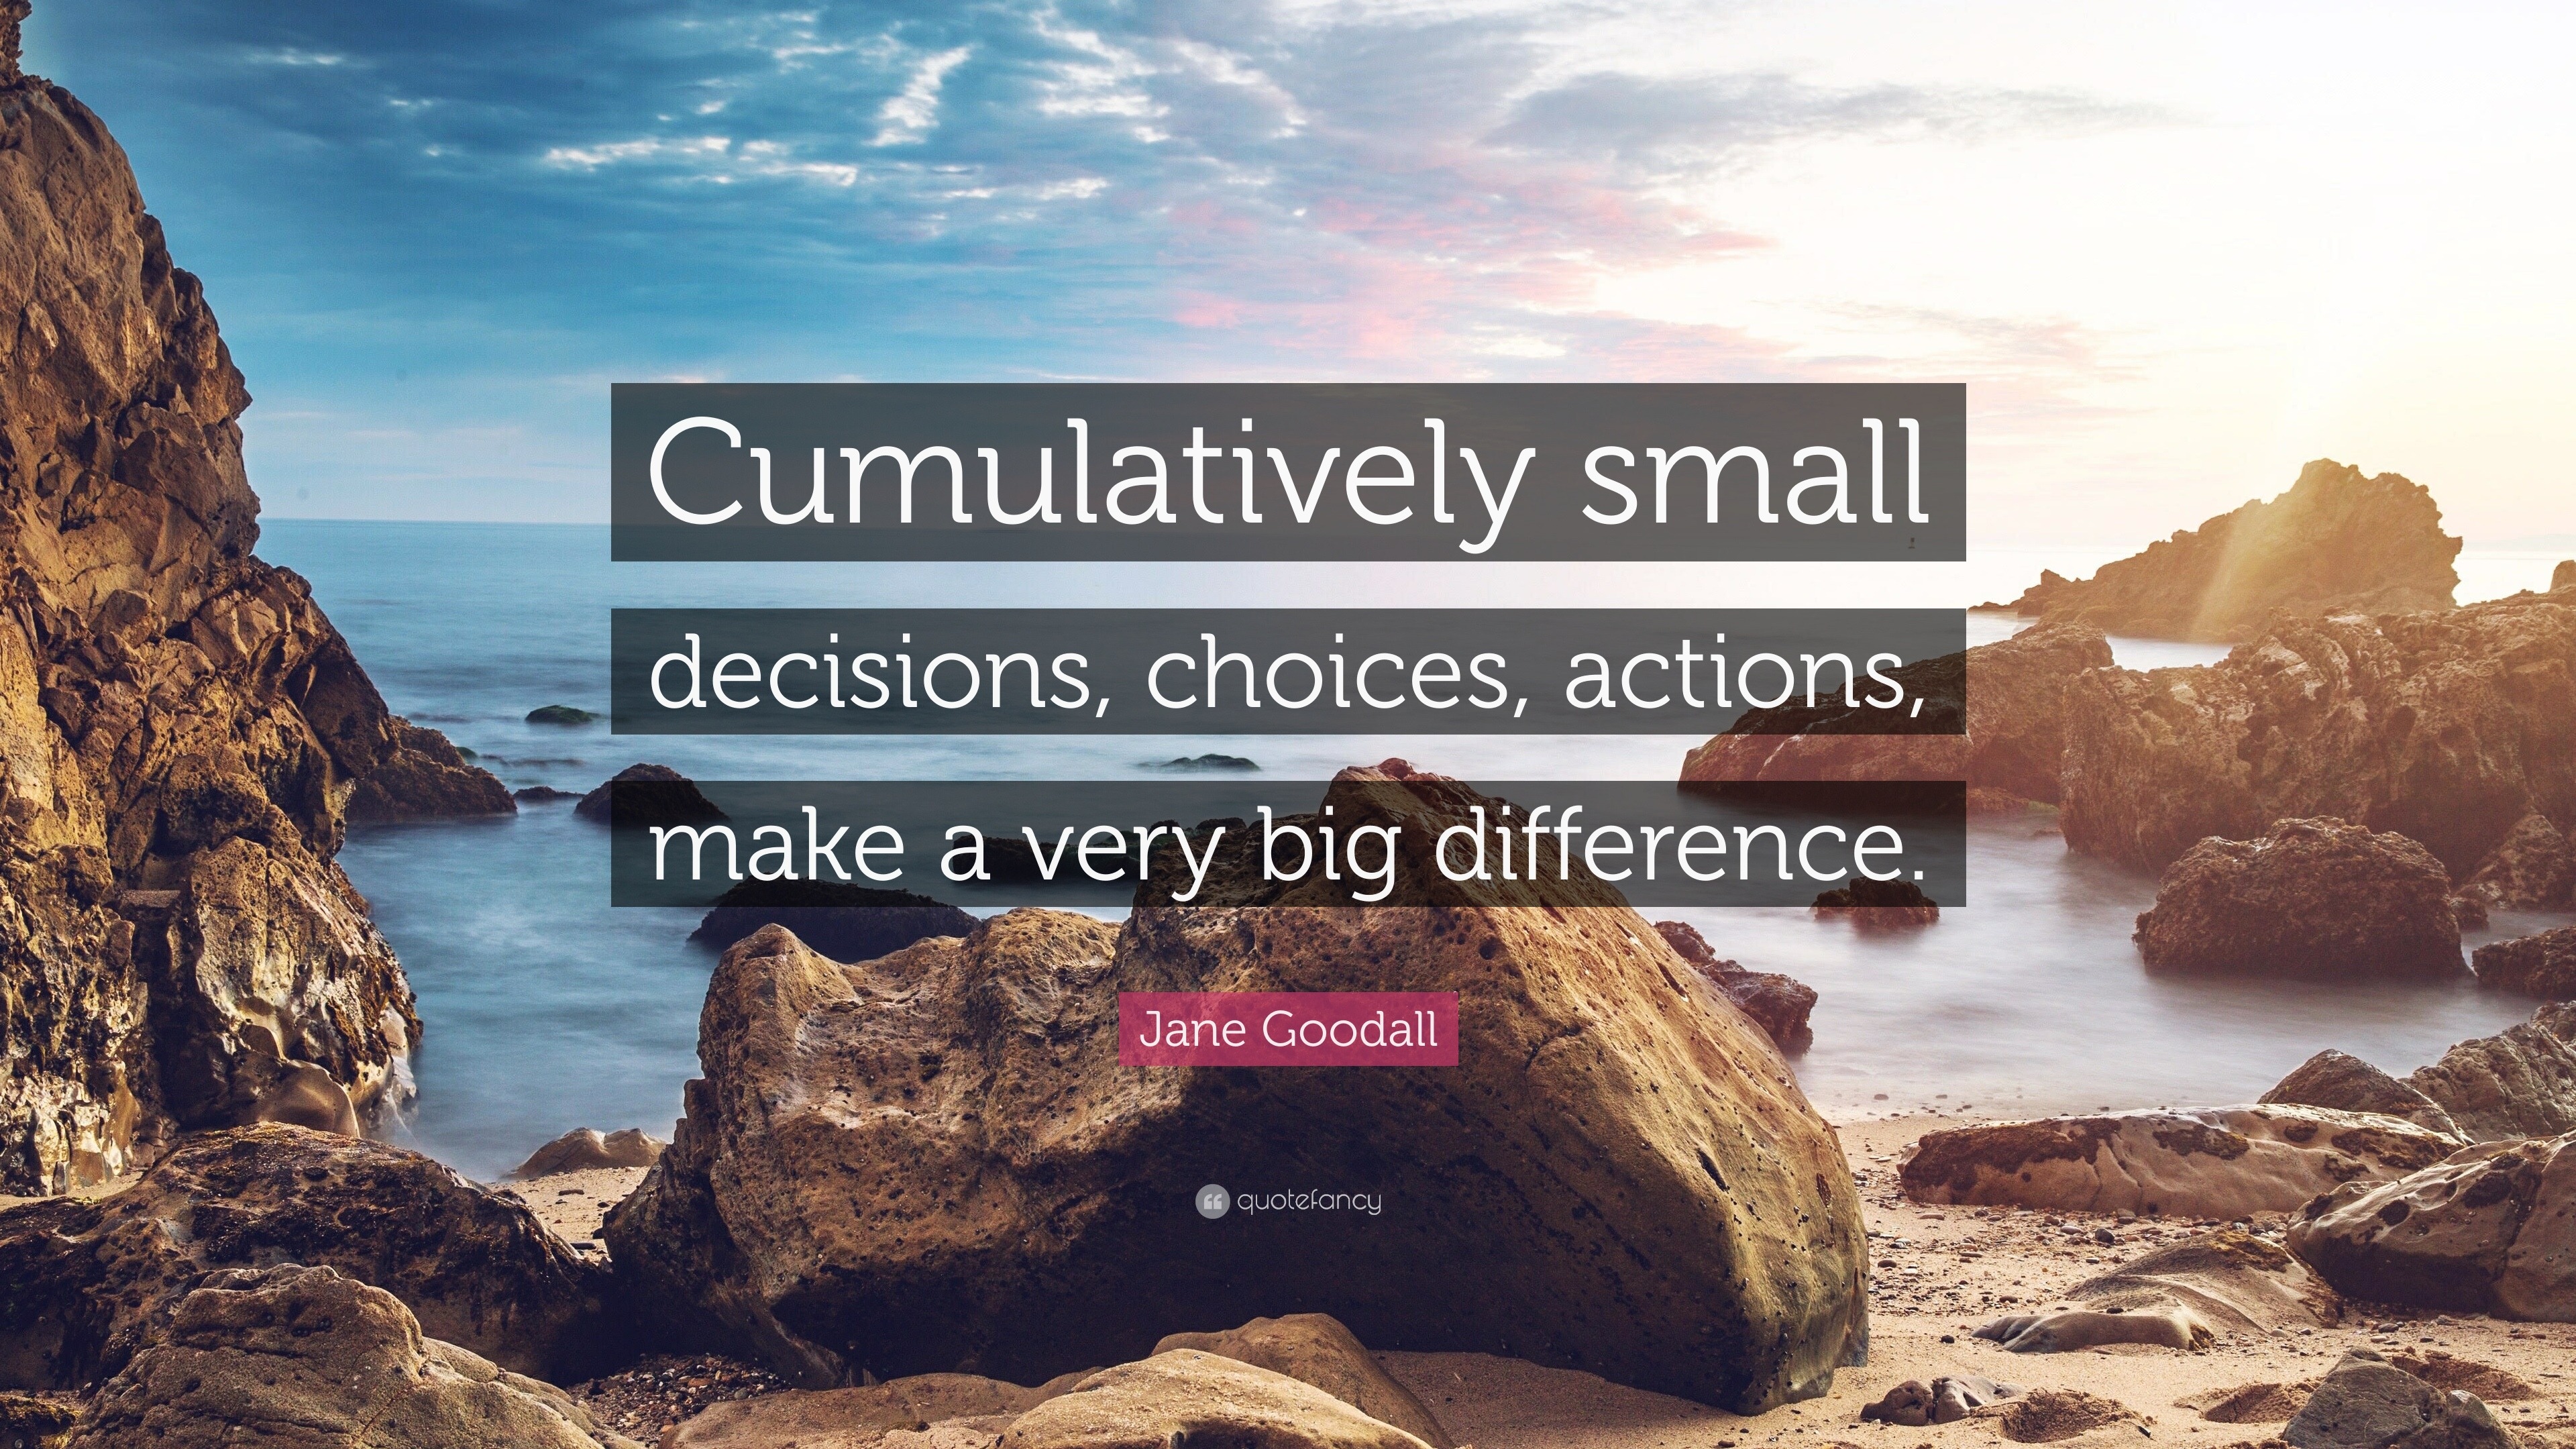 Jane Goodall Quote “Cumulatively small decisions, choices